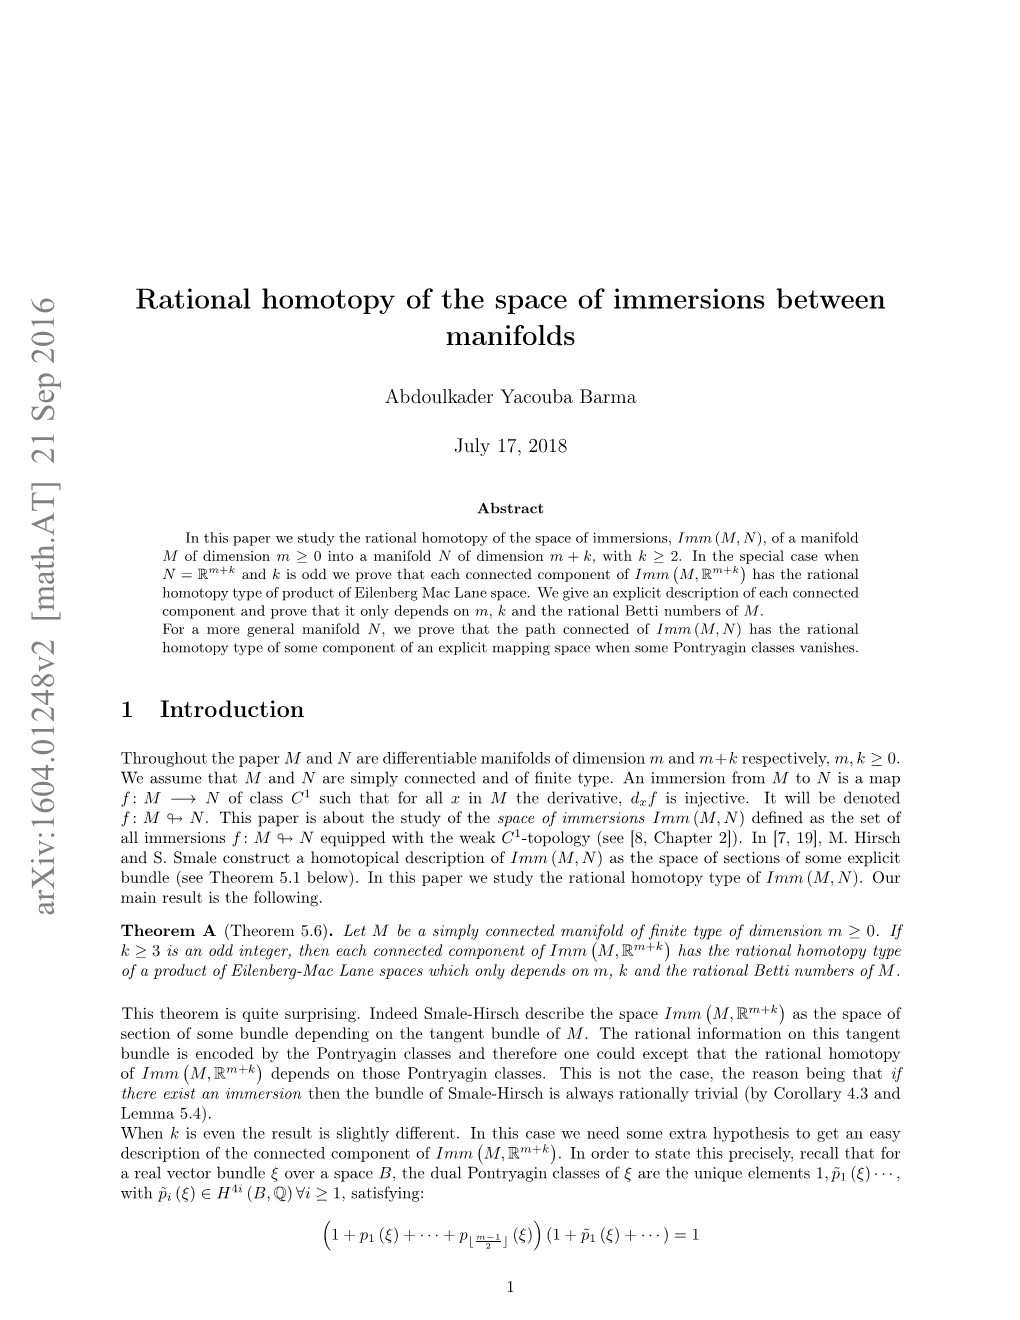 Rational Homotopy of the Space of Immersions Between Manifolds